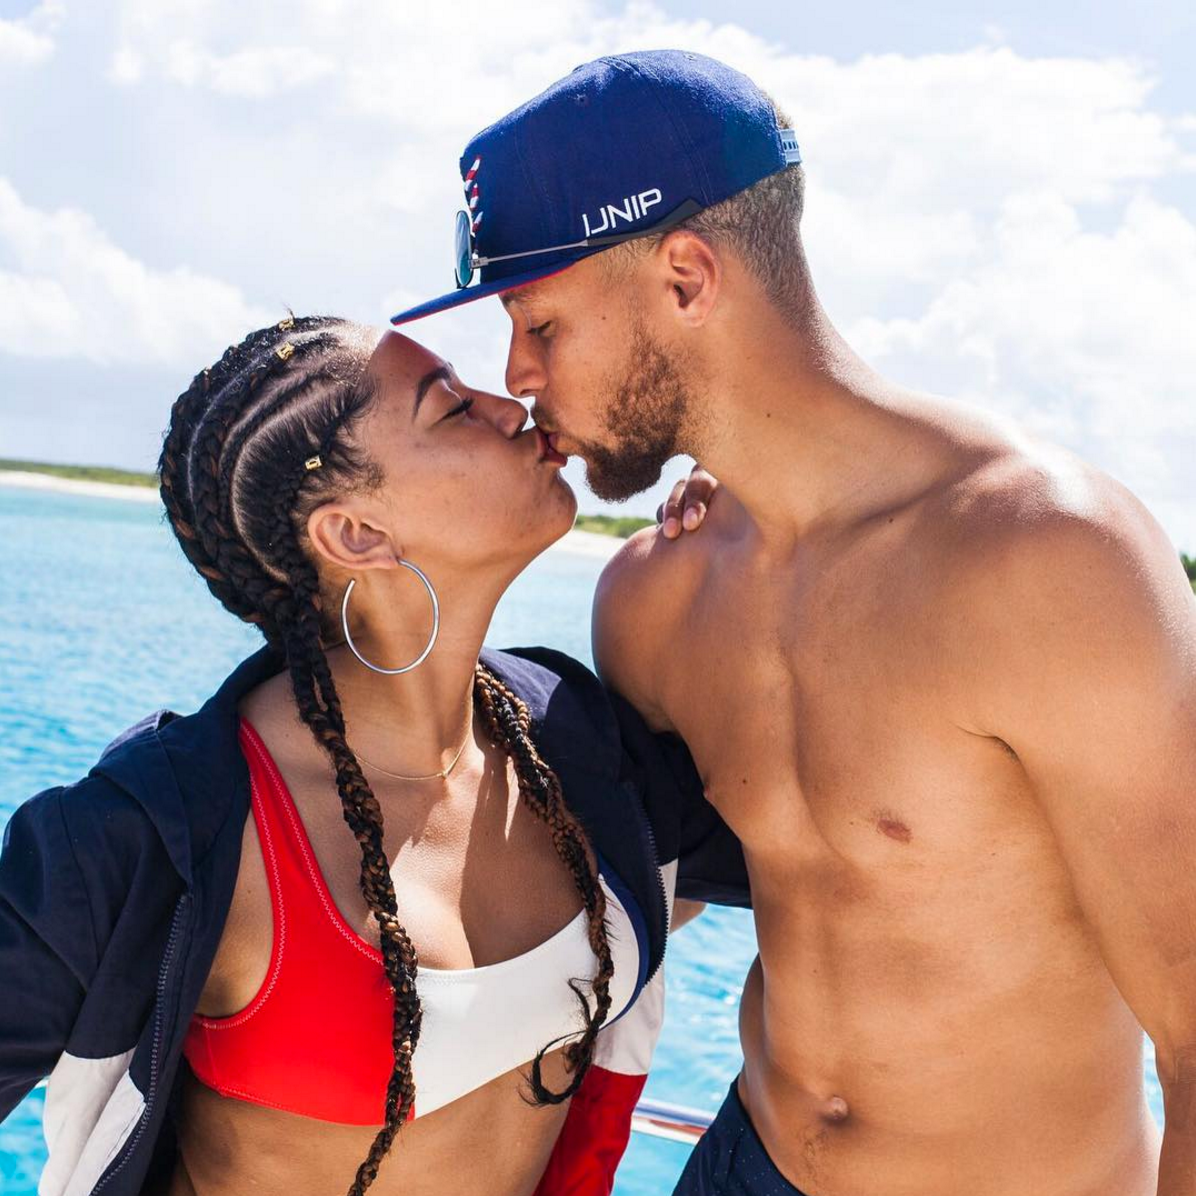 It appears Stephen Curry's parents are doing a spouse swap, they